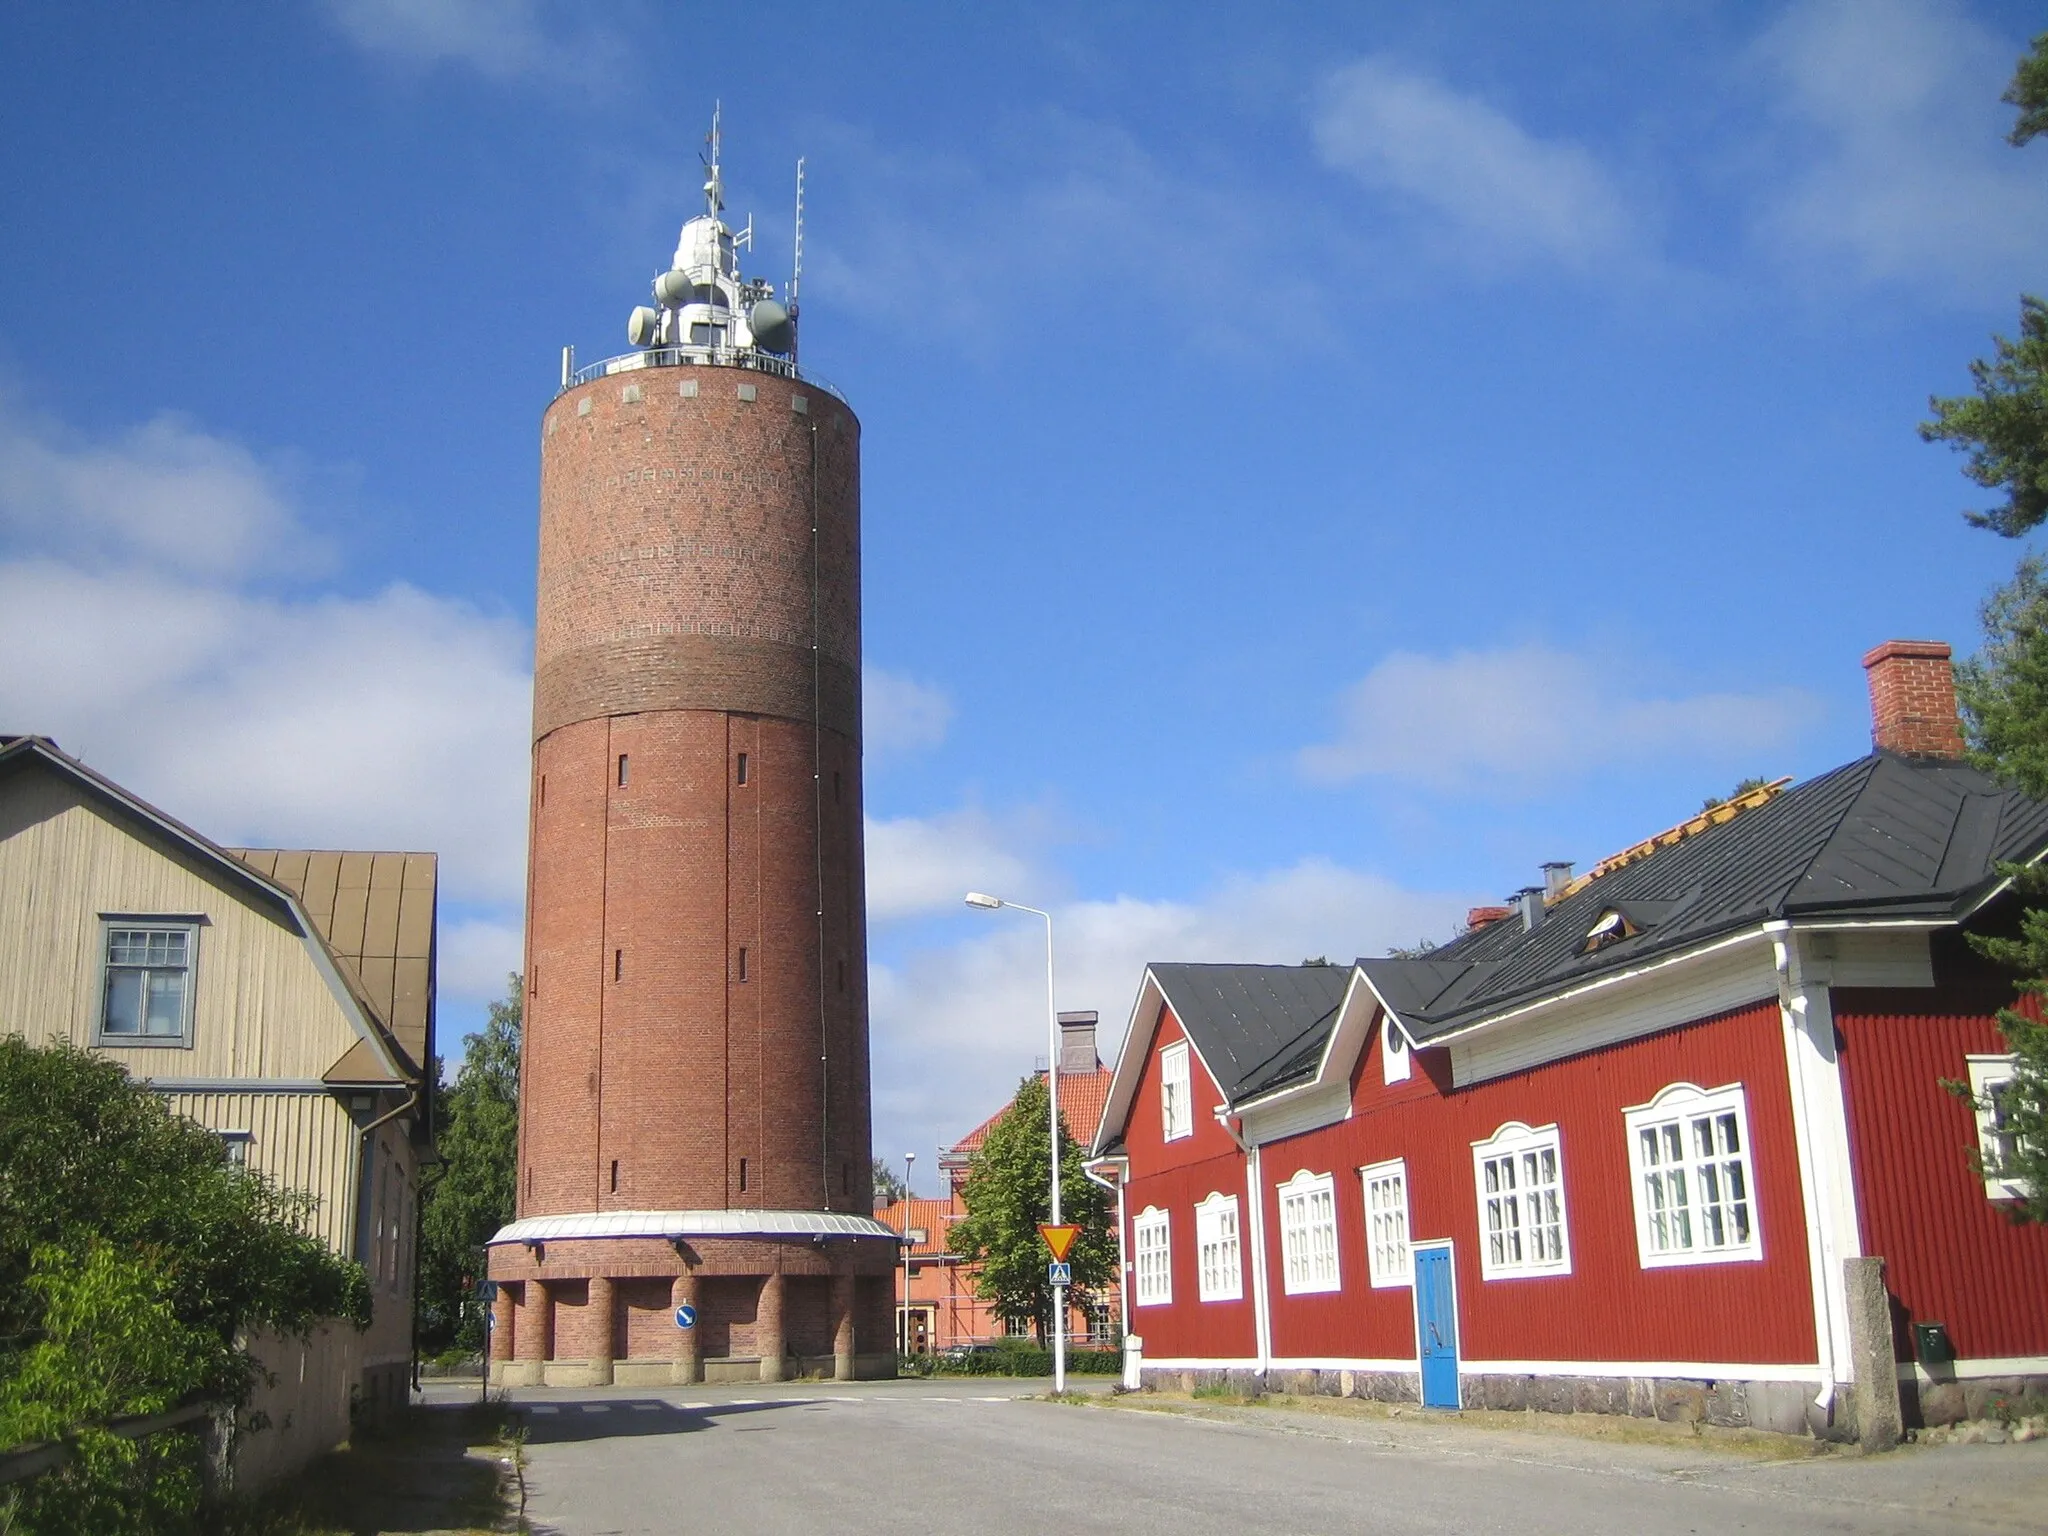 Photo showing: Water tower and surroundings, Kokkola, Finland. The water tower has been designed by architect Selim A. Lindqvist and was completed in 1921